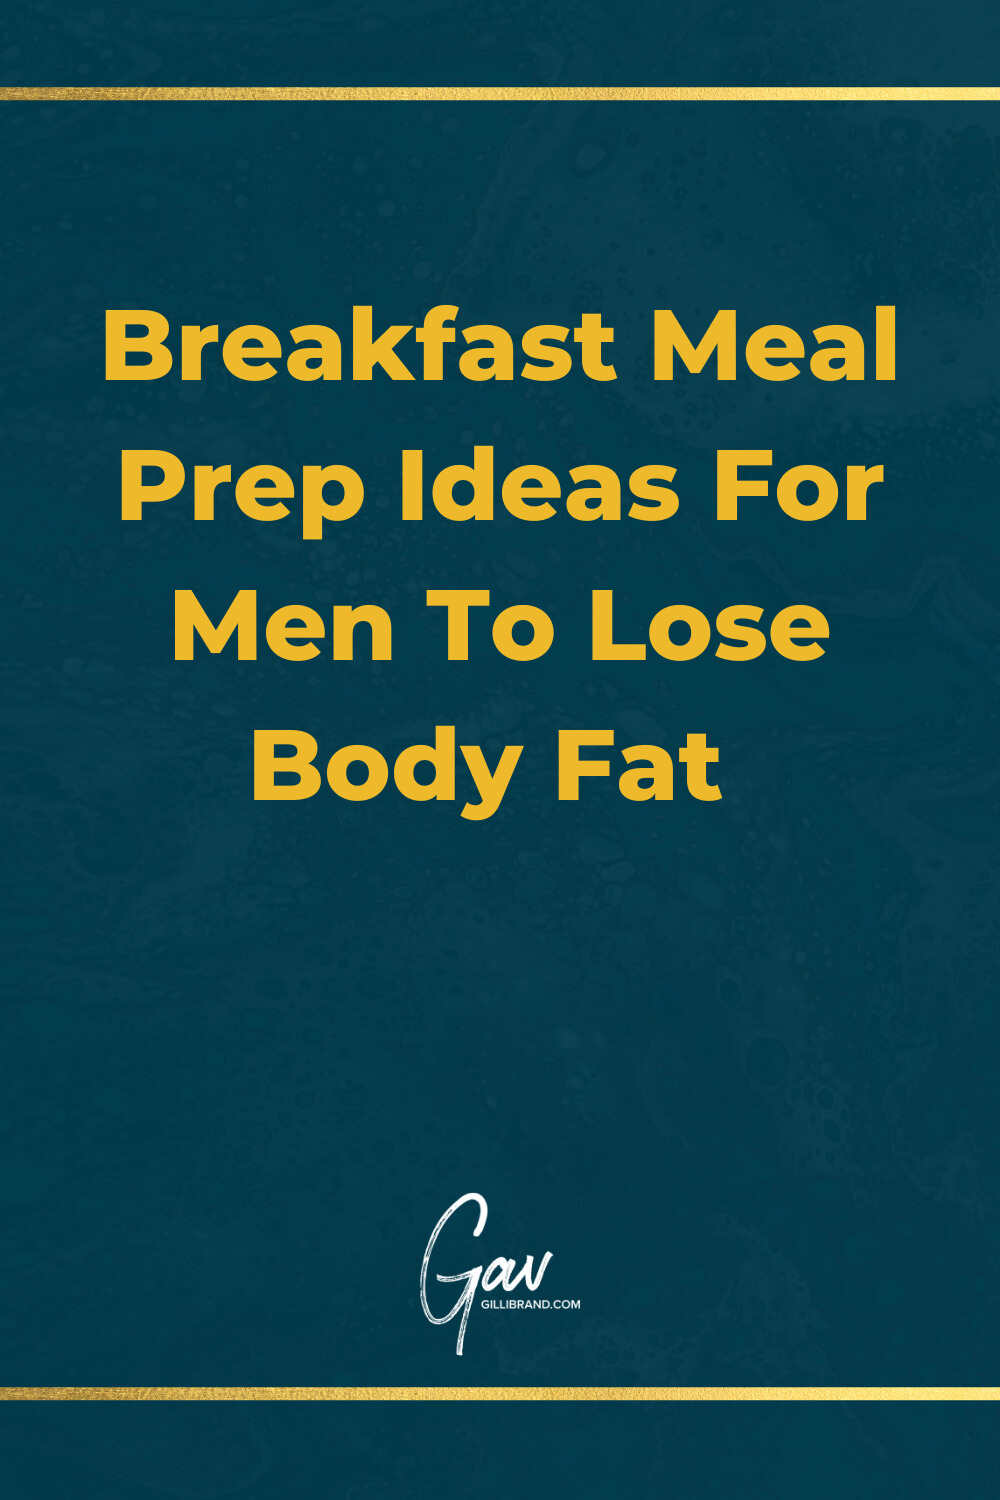 Blog cover for Meal Prep Article